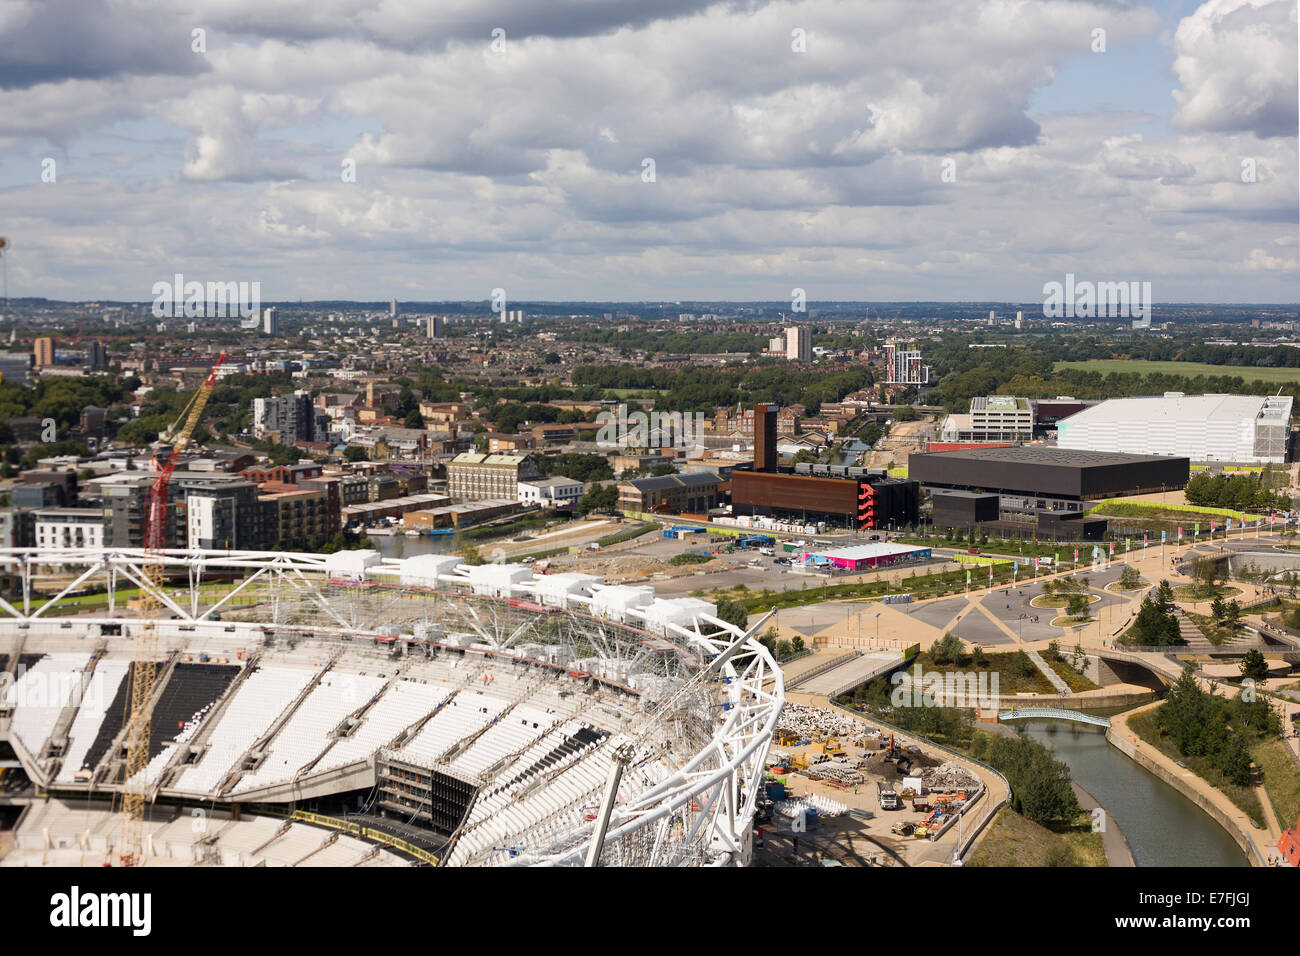 A view from the ArcelorMittal Orbit across Queen Elizabeth Olympic Park detail of Orbit and Stadium. Stock Photo